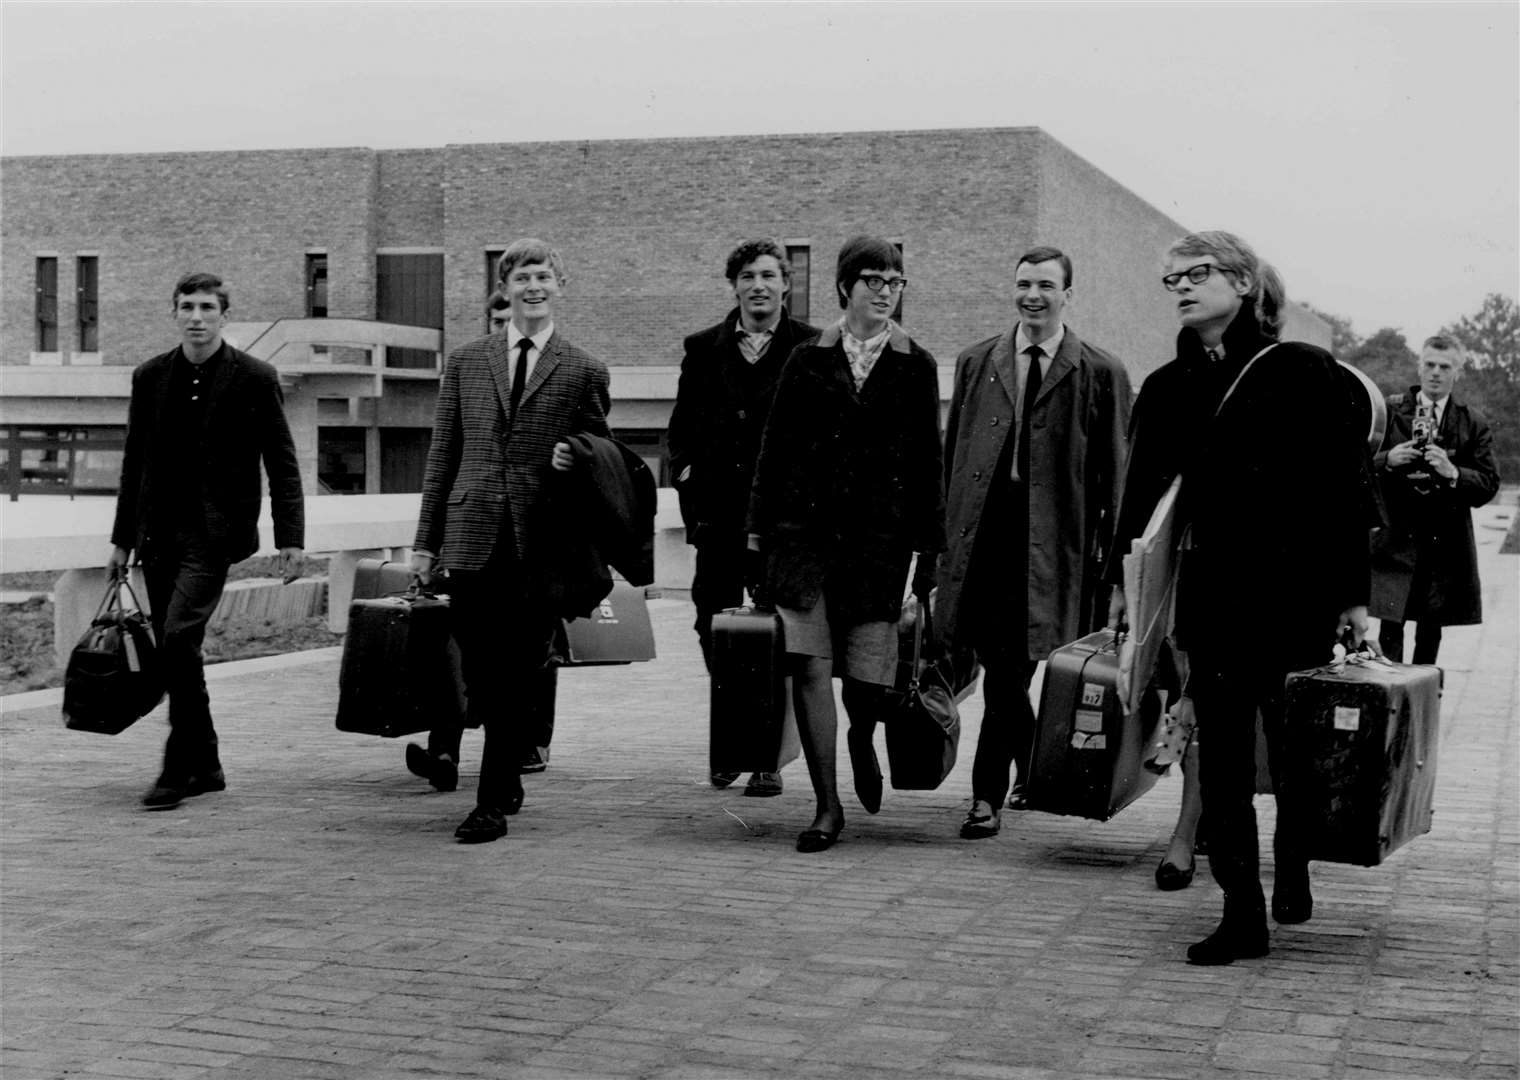 Some of the first 460 undergraduates arrive to occupy Eliot College at the University of Kent in October 1965. Rutherford College opened a year later, followed by Keynes in 1968 and Darwin in 1970